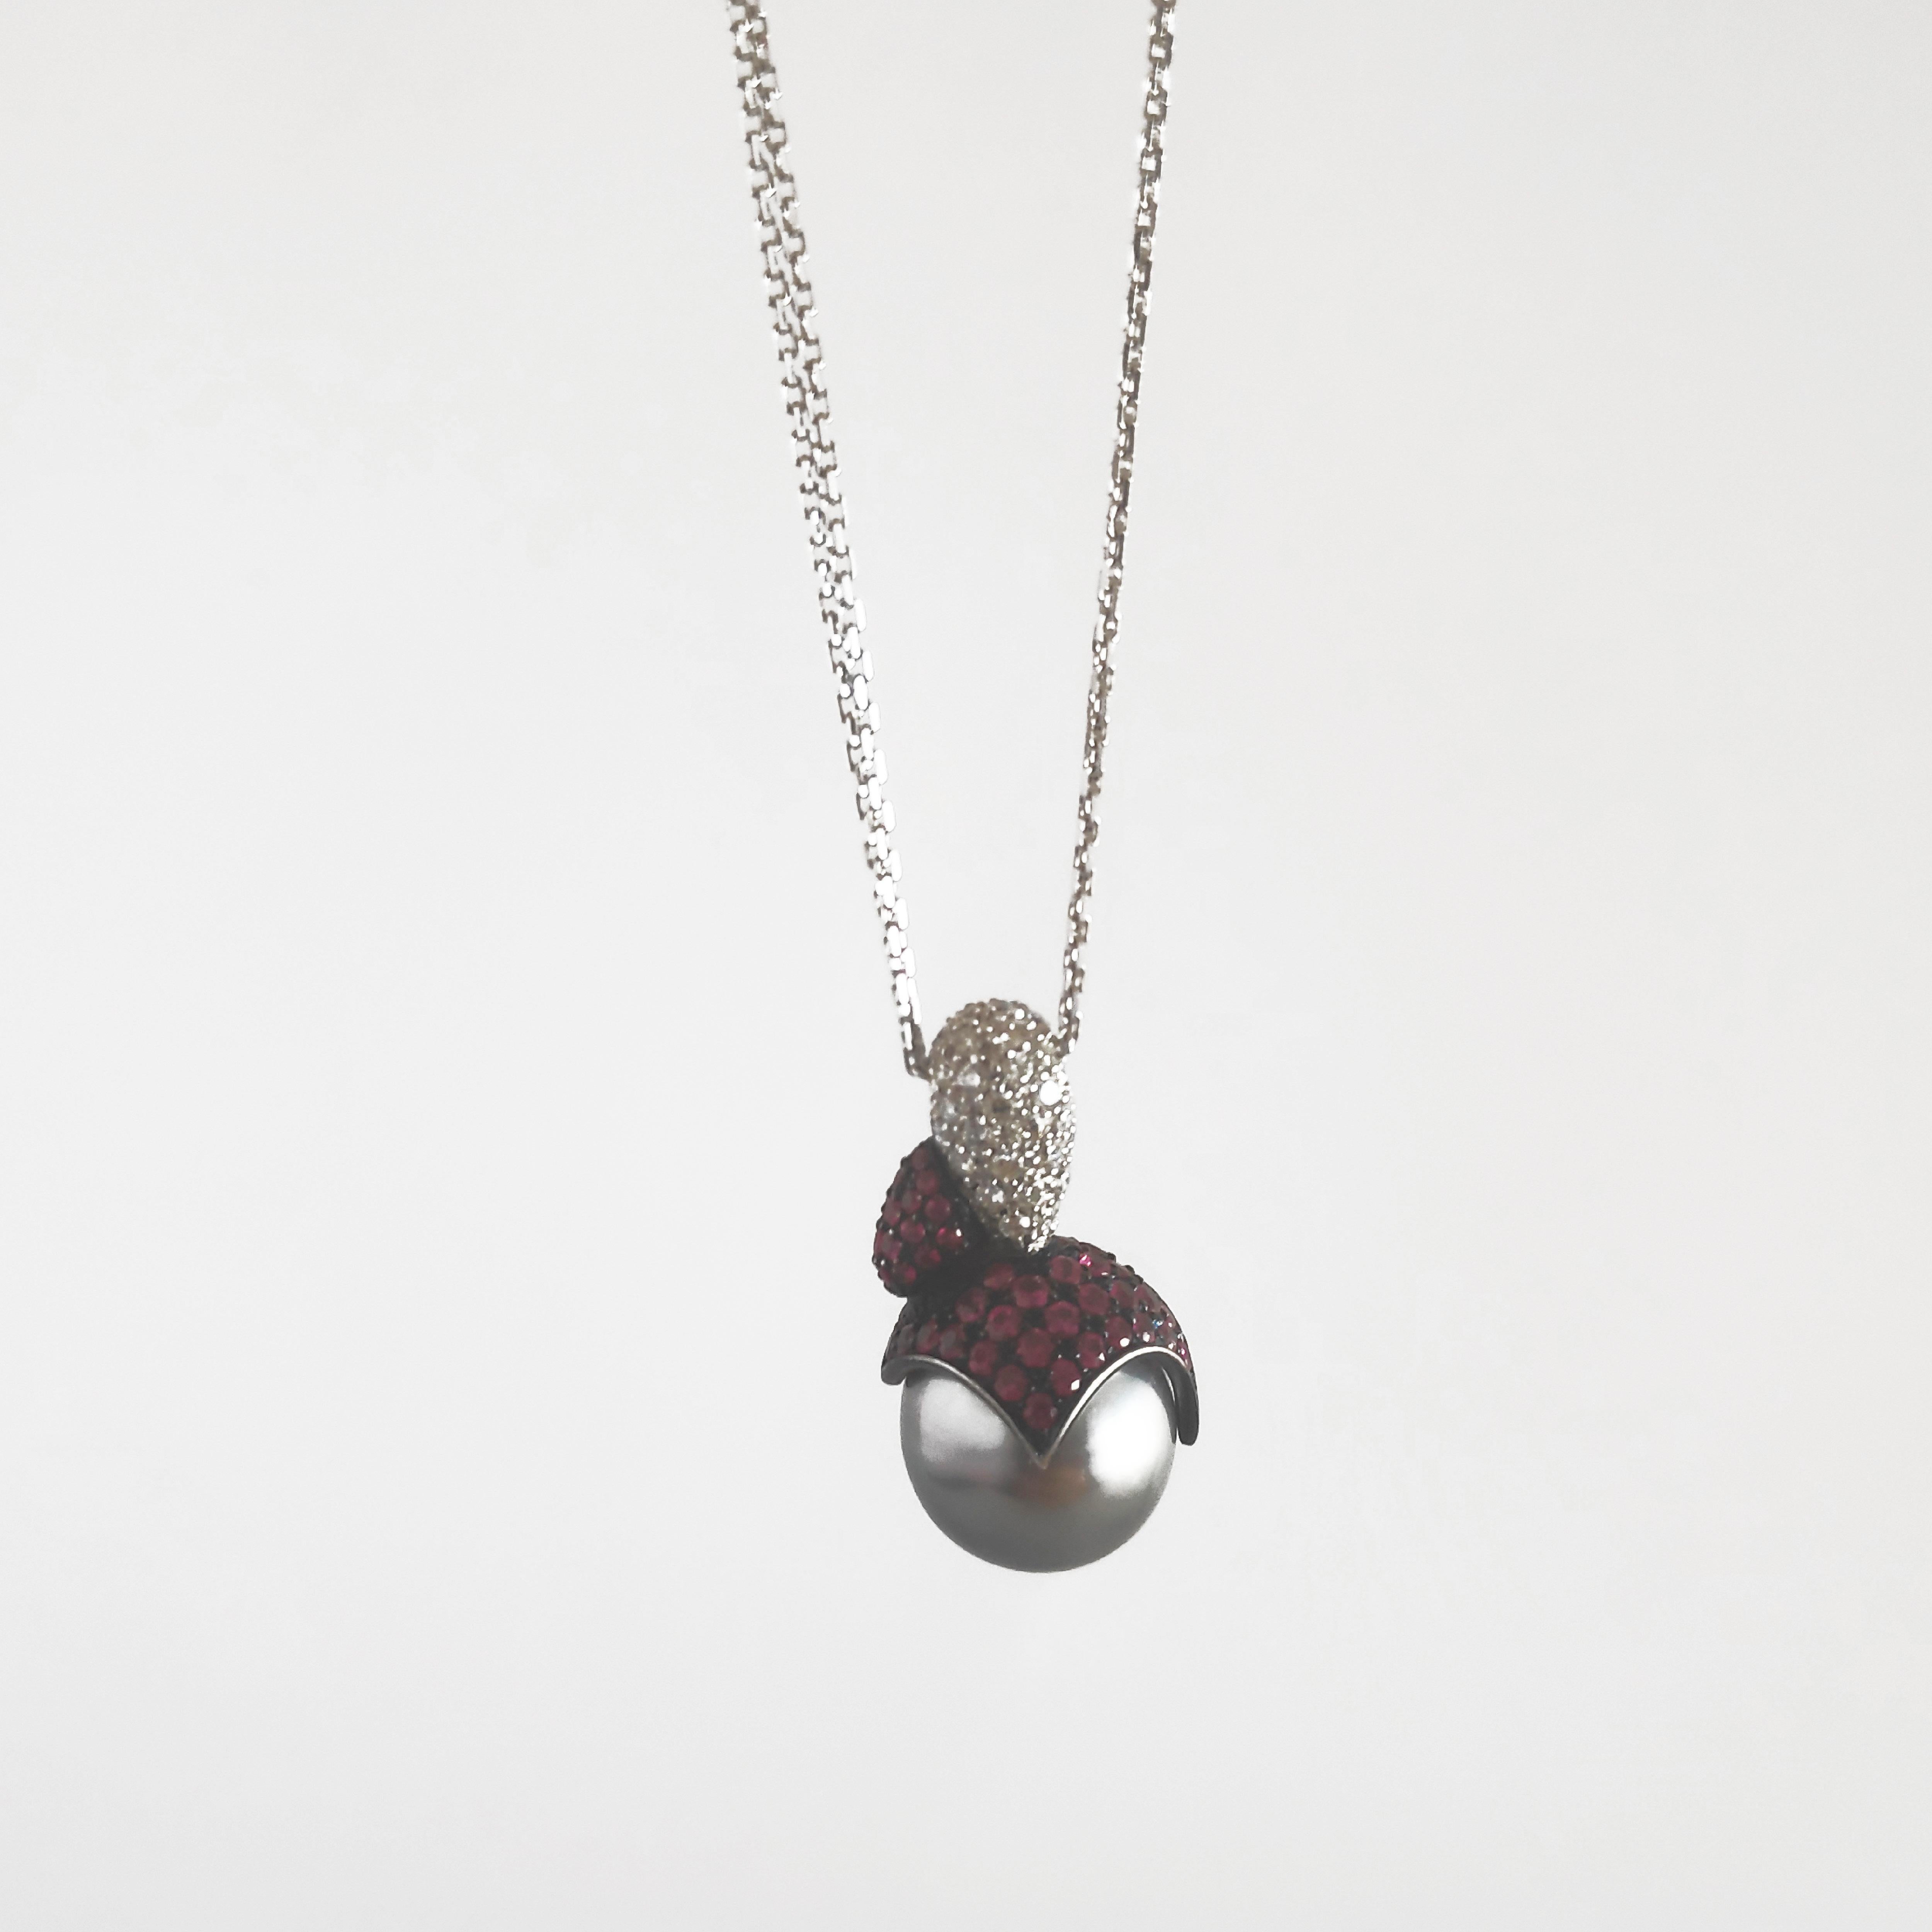 This pendant necklace is handcrafted in white 19.2K gold with a beautiful Tahitian Cultured Pearl and set with white diamonds and rubies. This piece is designed by Monseo and manufactured by Monseo artisans in Porto, Portugal.                       